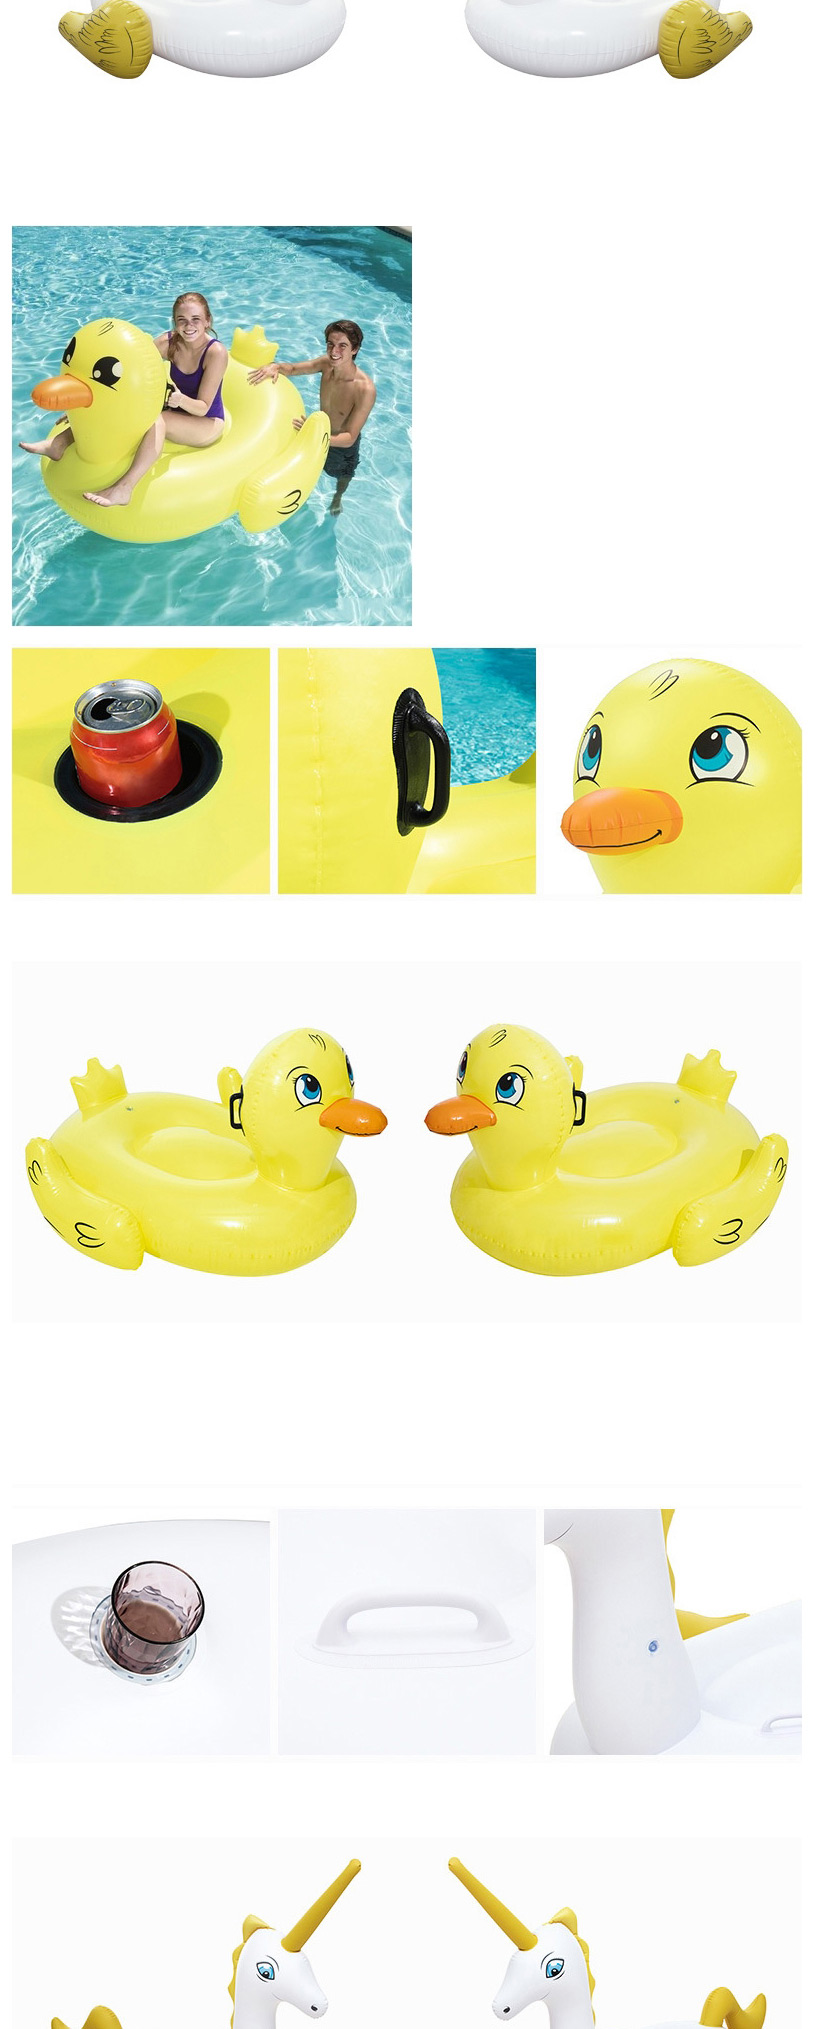 Fashion Red Crane Water Animal Inflatable Mount Toy Floating Bed,Swim Rings